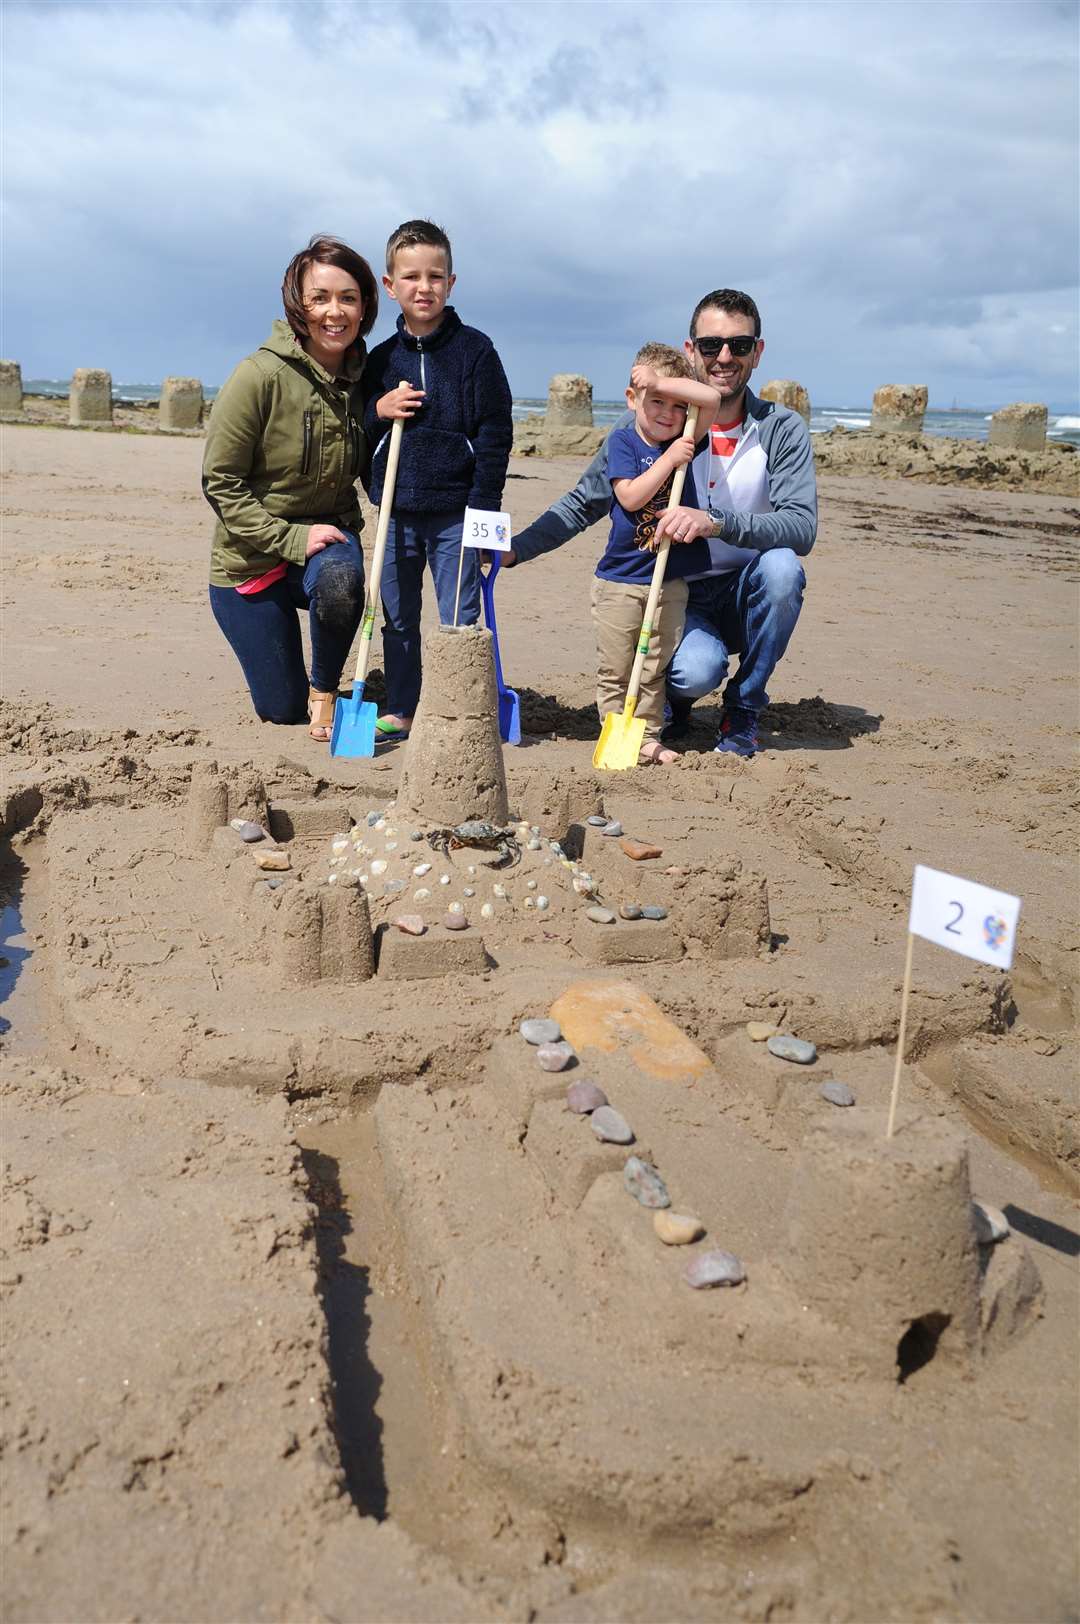 Previous sandcastle competition winners, the More family. Picture: Eric Cormack